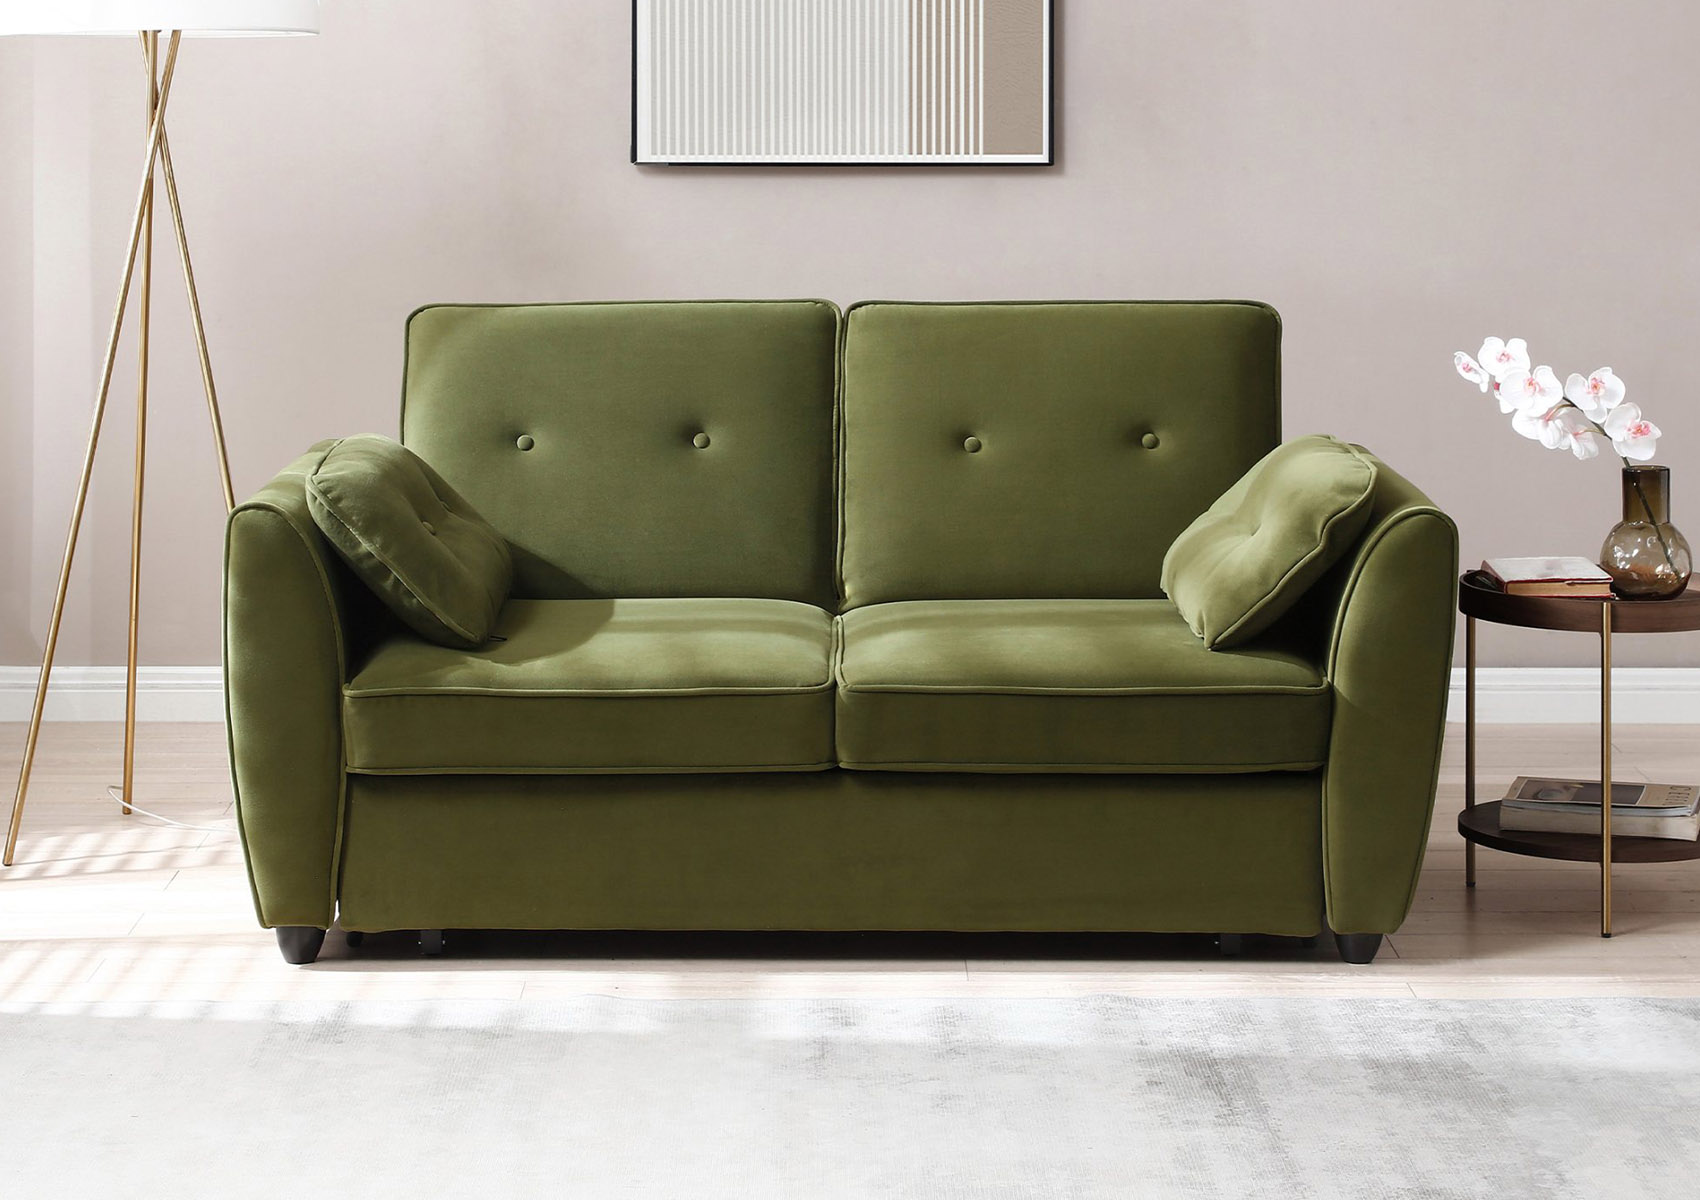 View Osiris 2 Seater Olive Green Sofa Bed Time4Sleep information